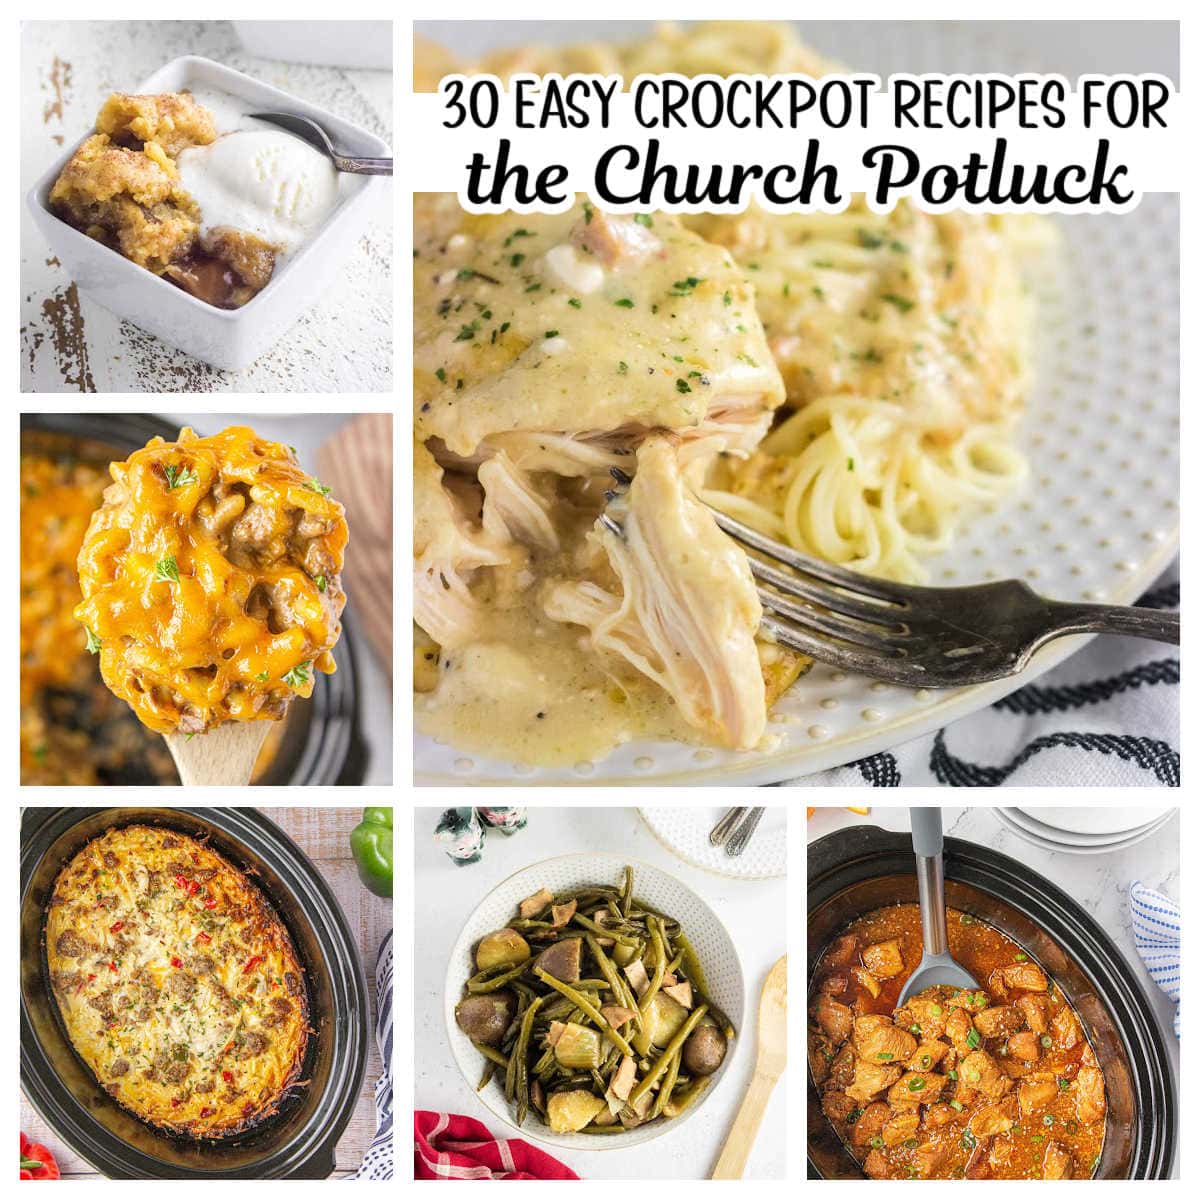 A collage of recipe images from this roundup of potluck recipes with a title text overlay.